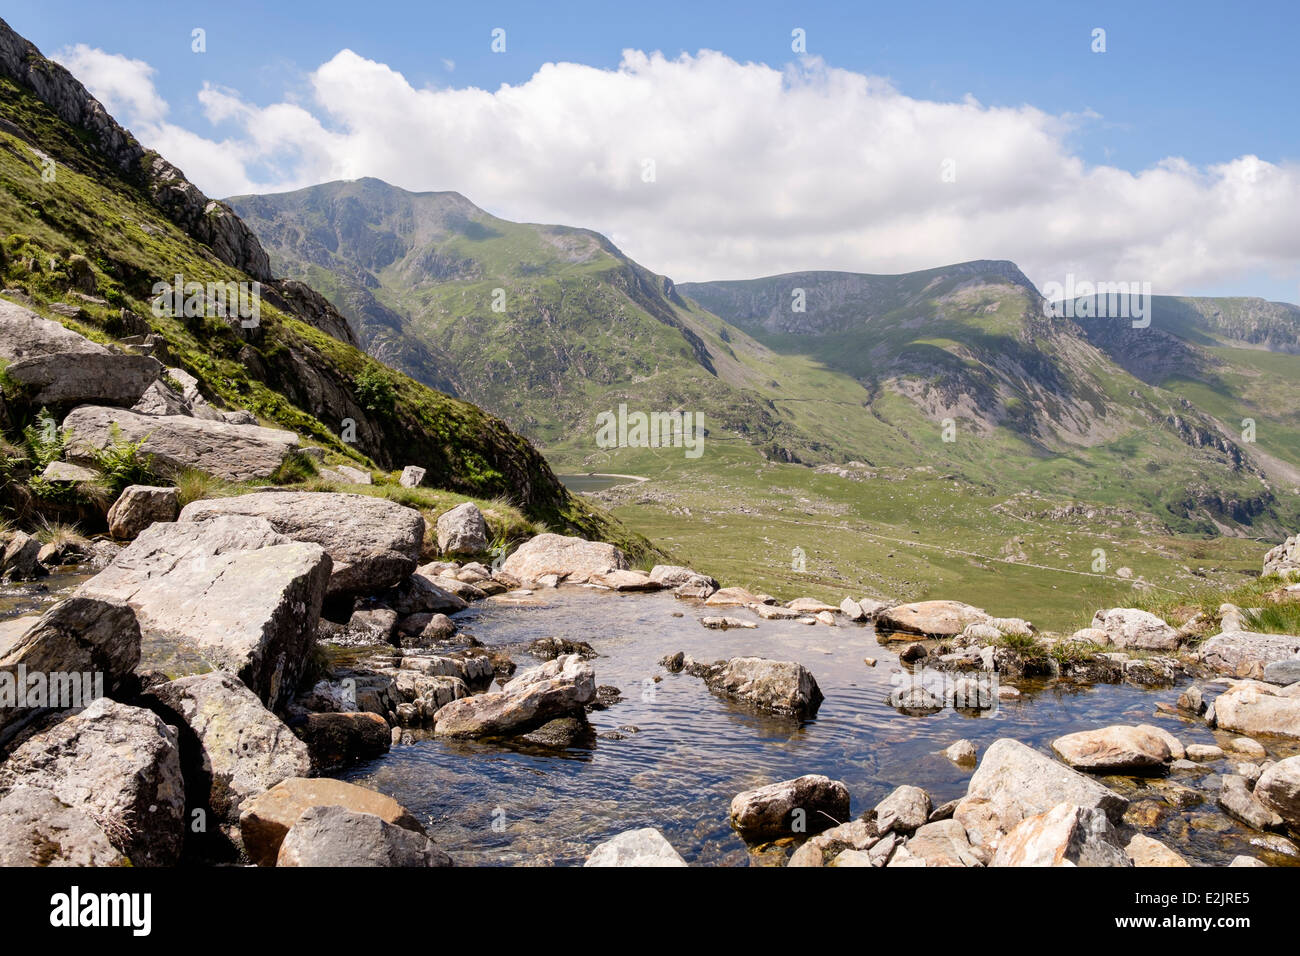 View across mountain stream to Y Garn and northern Glyderau above Ogwen Valley in mountains of Snowdonia National Park (Eryri) Wales UK Stock Photo